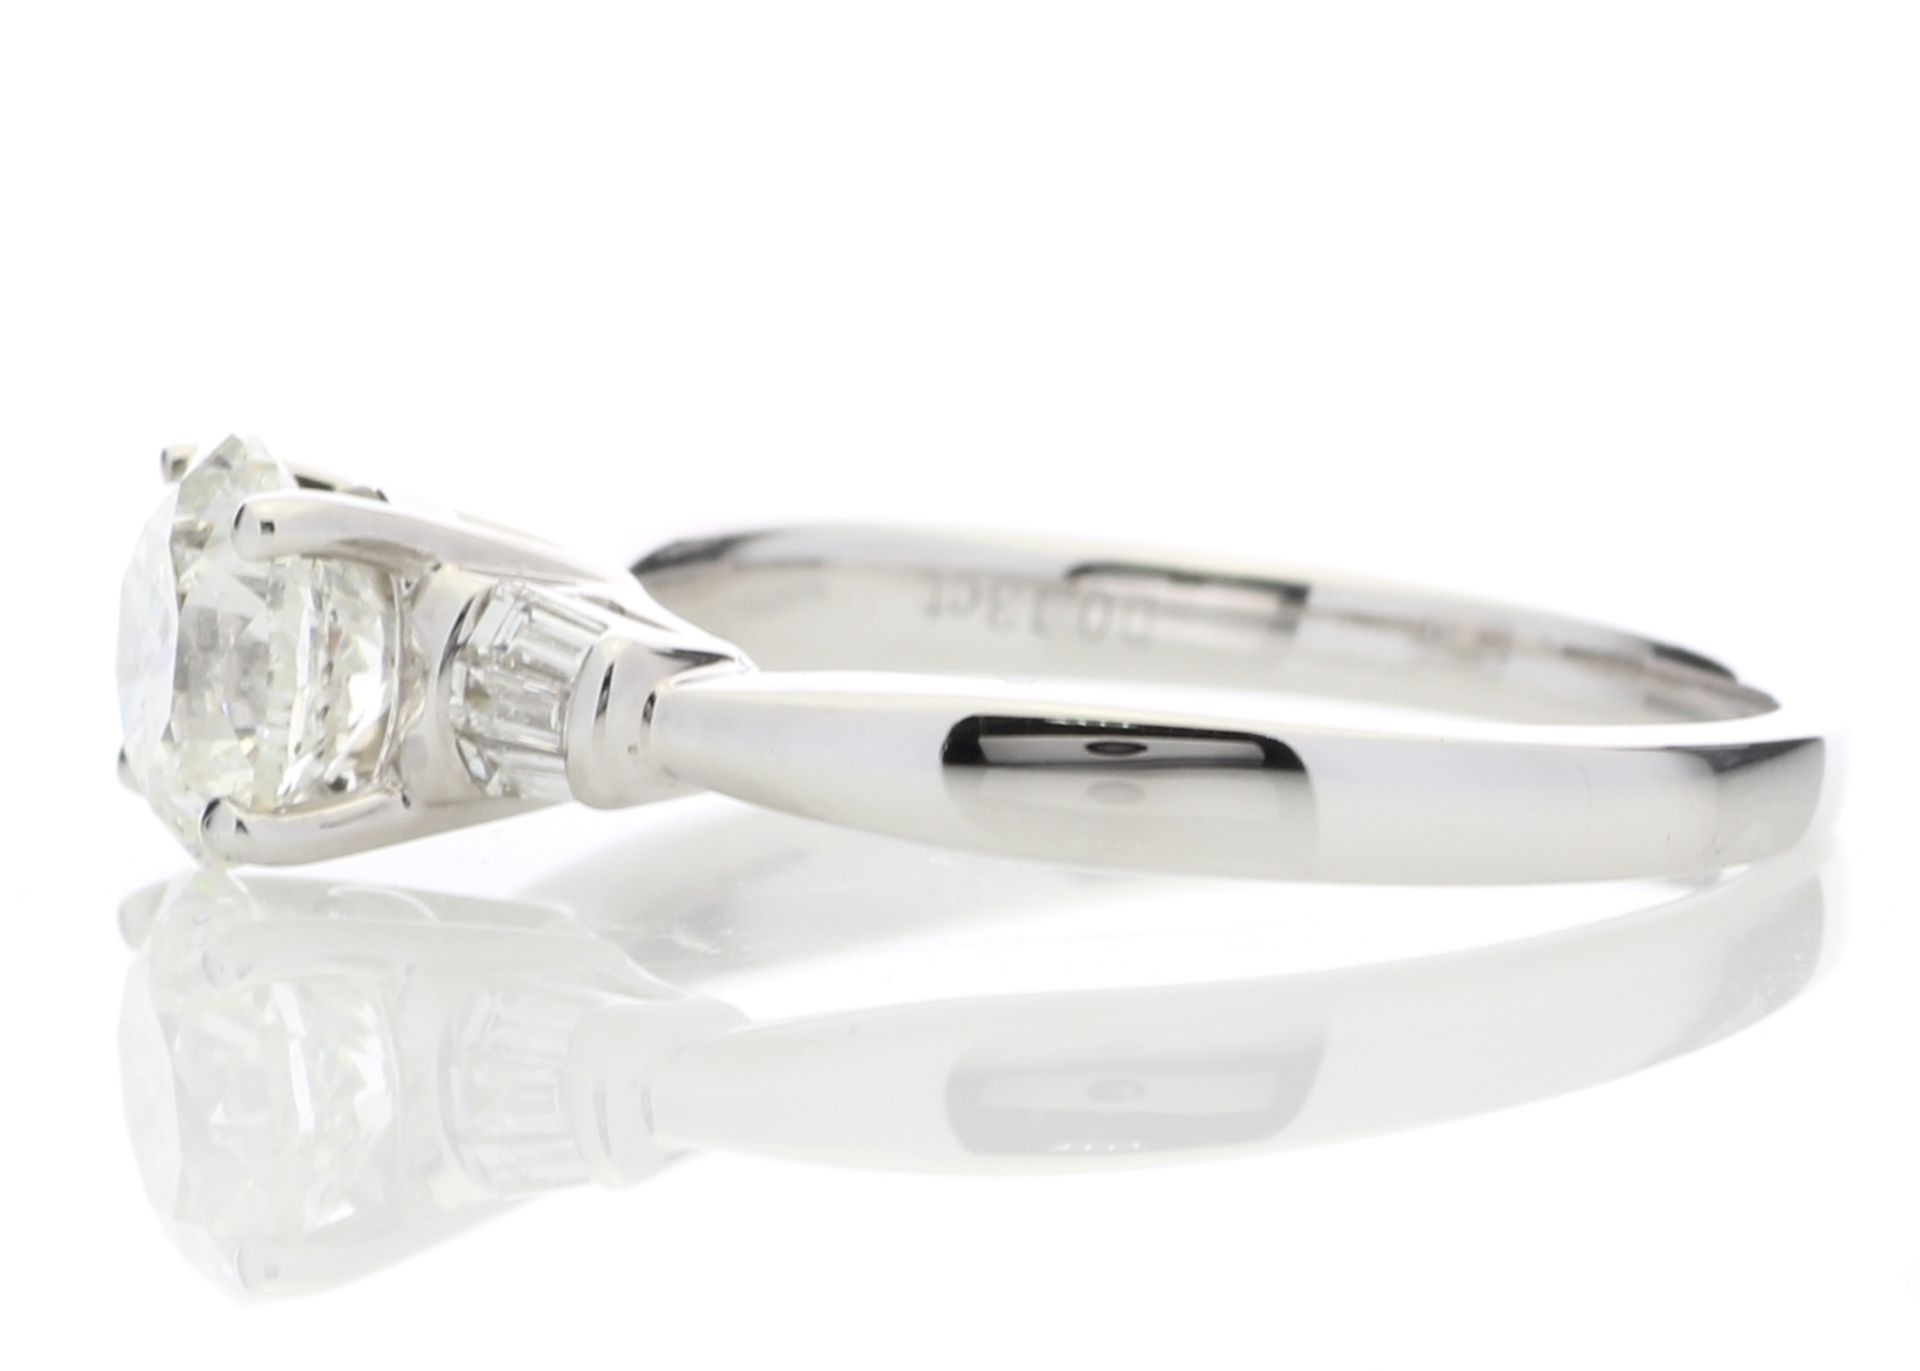 18ct White Gold Single Stone Diamond Ring With Baguette (1.02) 1.15 Carats - Valued by GIE £37,300. - Image 3 of 5